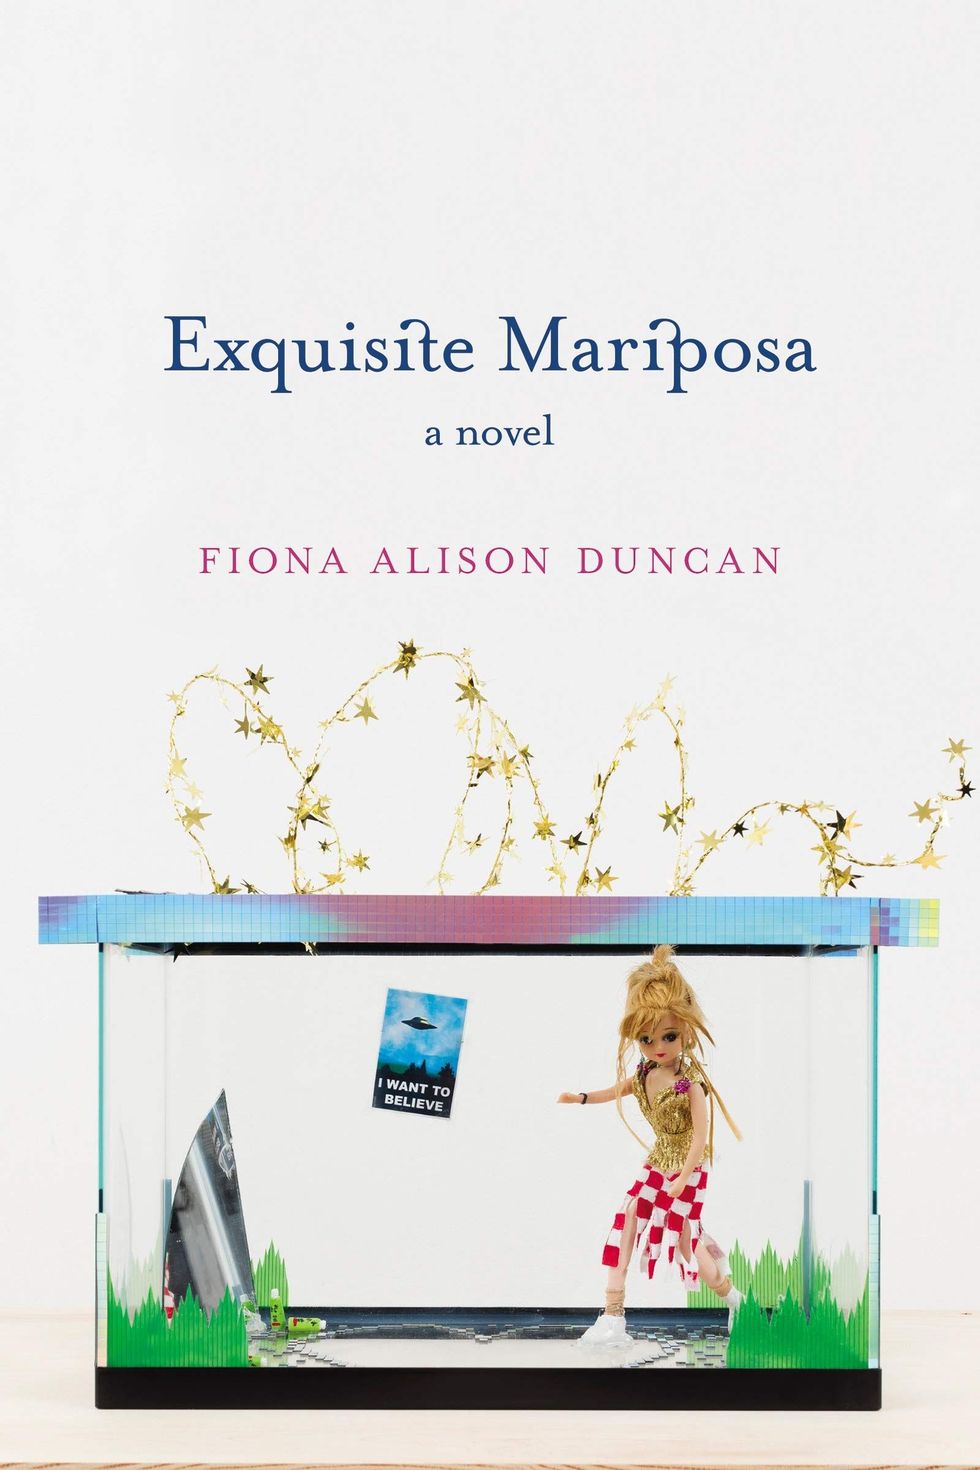 ‘Exquisite Mariposa: A Novel’ by Fiona Alison Duncan